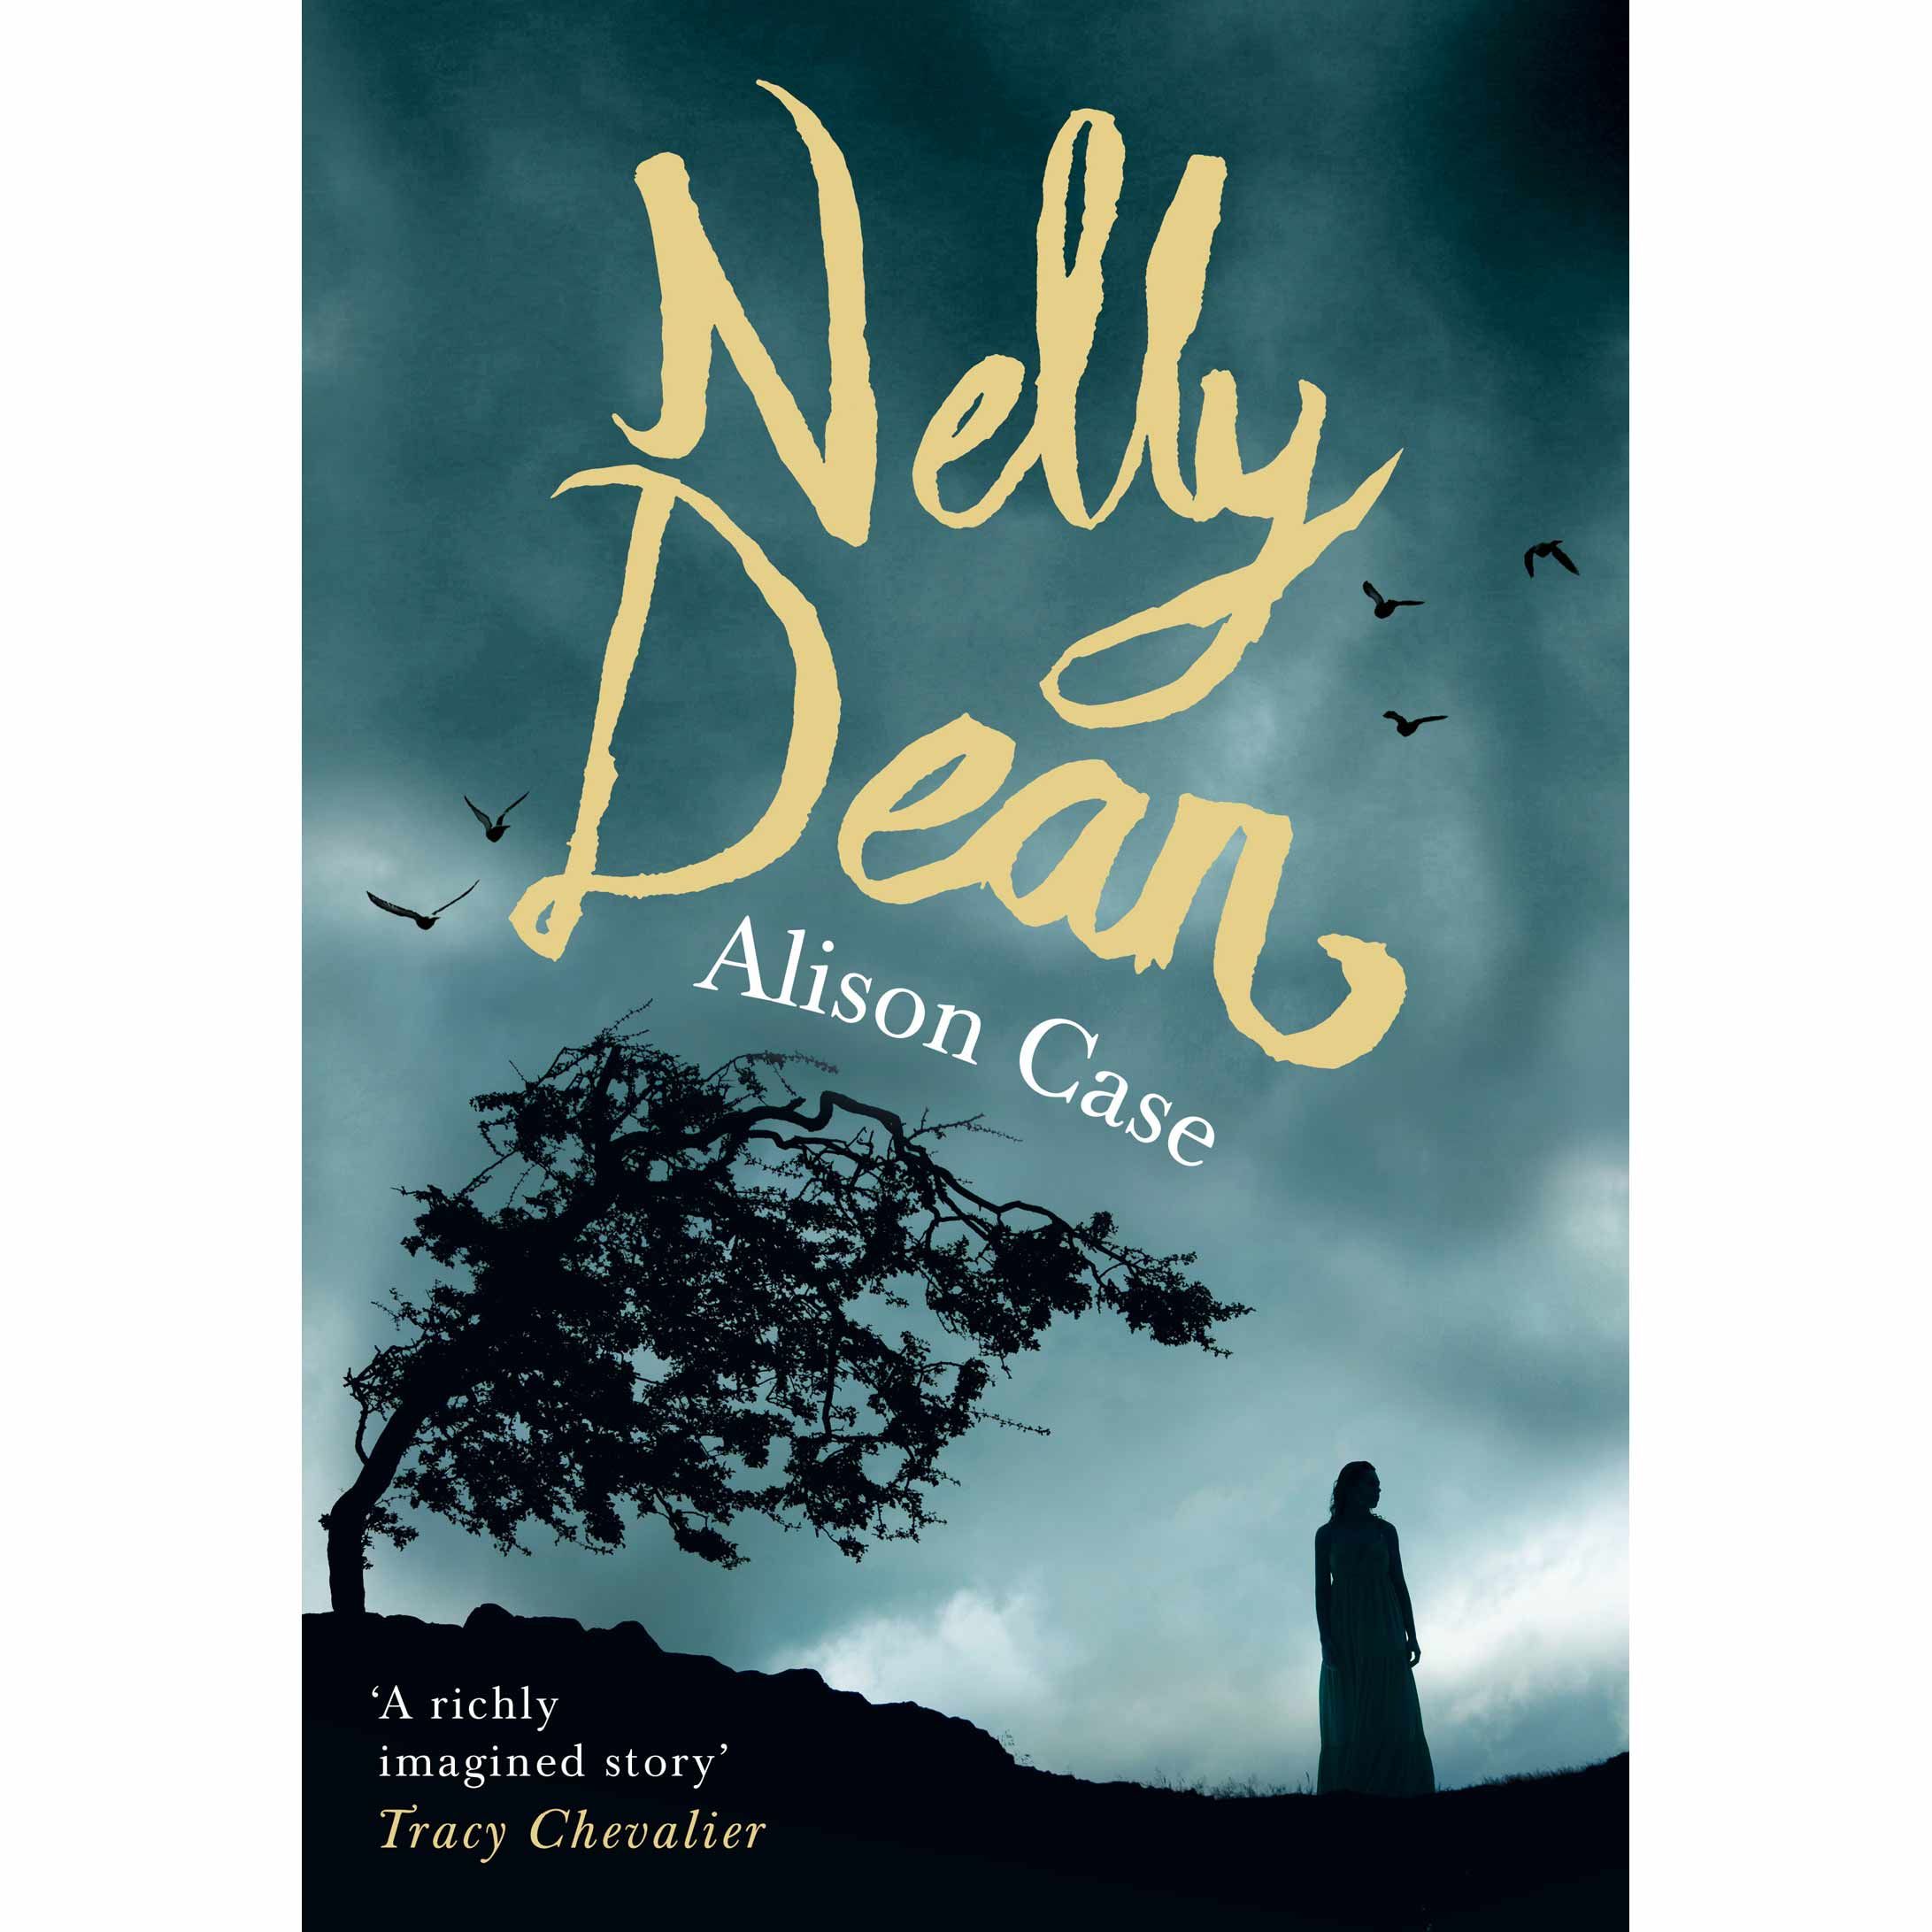 nelly dean